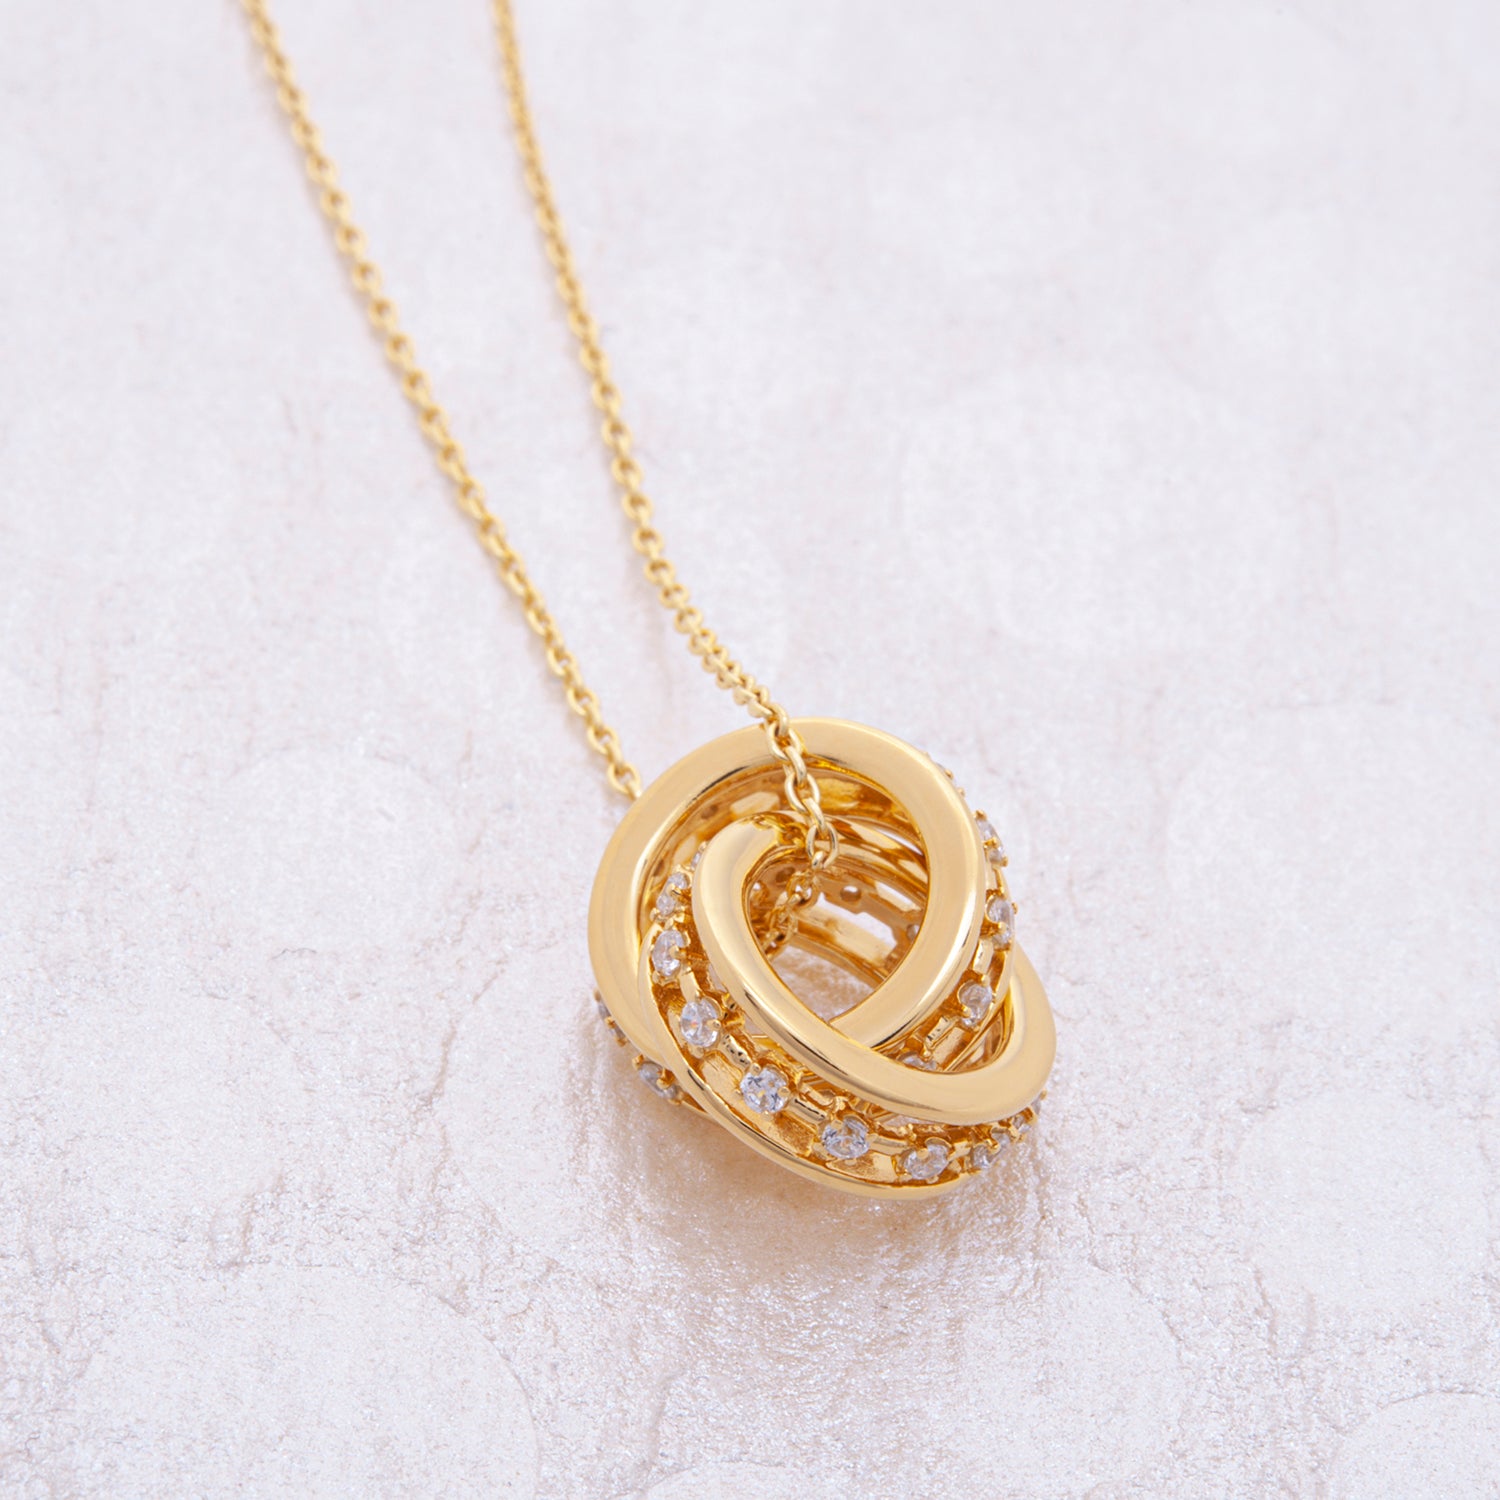 Prystn Petite Pendant in Yellow Gold